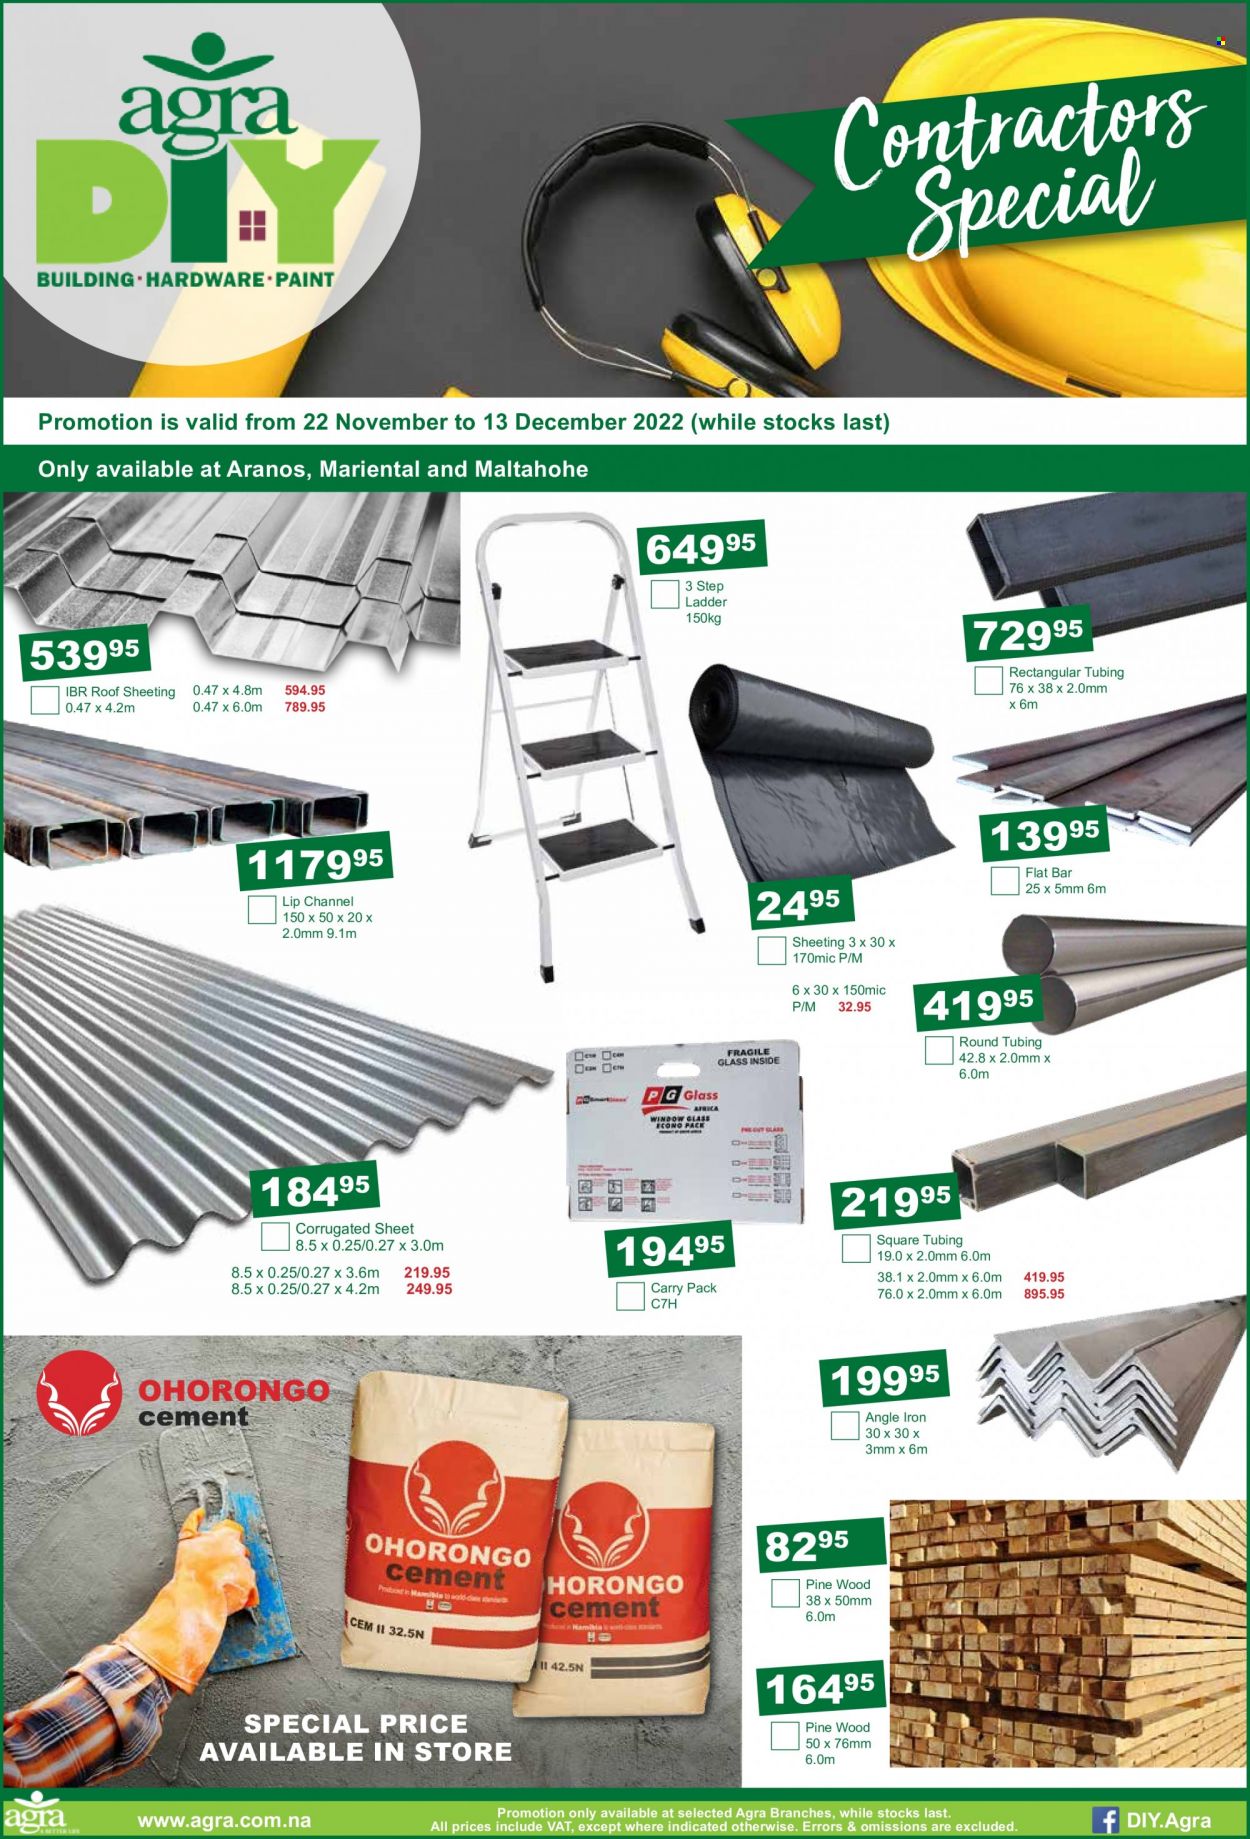 thumbnail - Agra catalogue  - 22/11/2022 - 13/12/2022 - Sales products - ladder, sheeting, paint. Page 4.